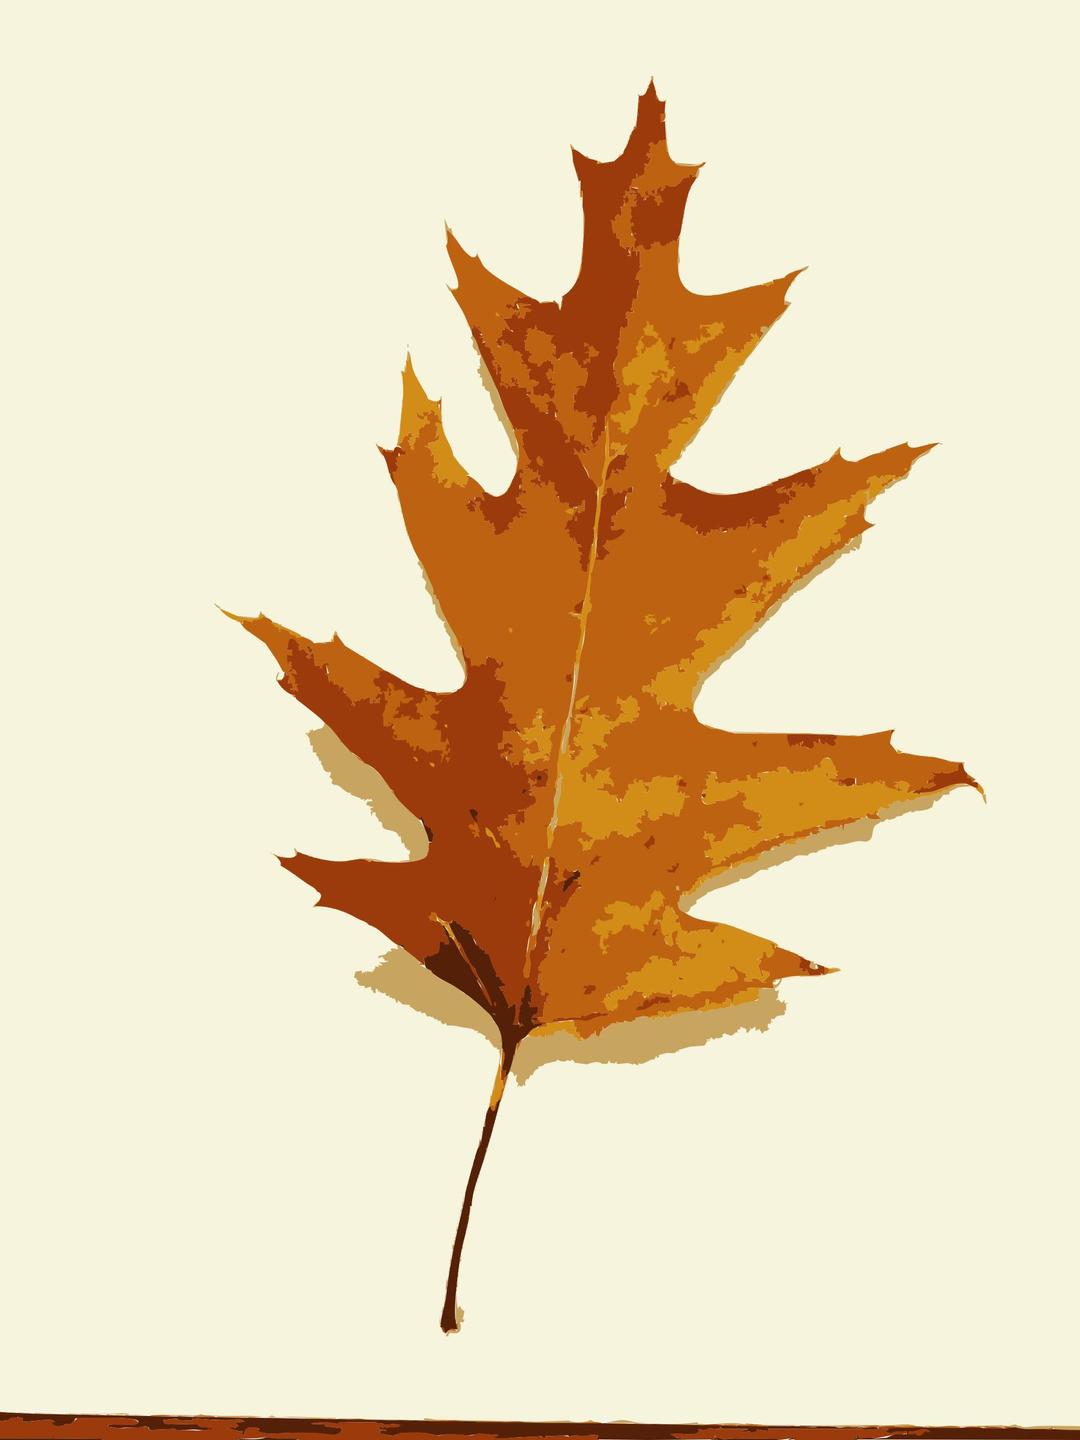 More fall tree leaves 1 png transparent